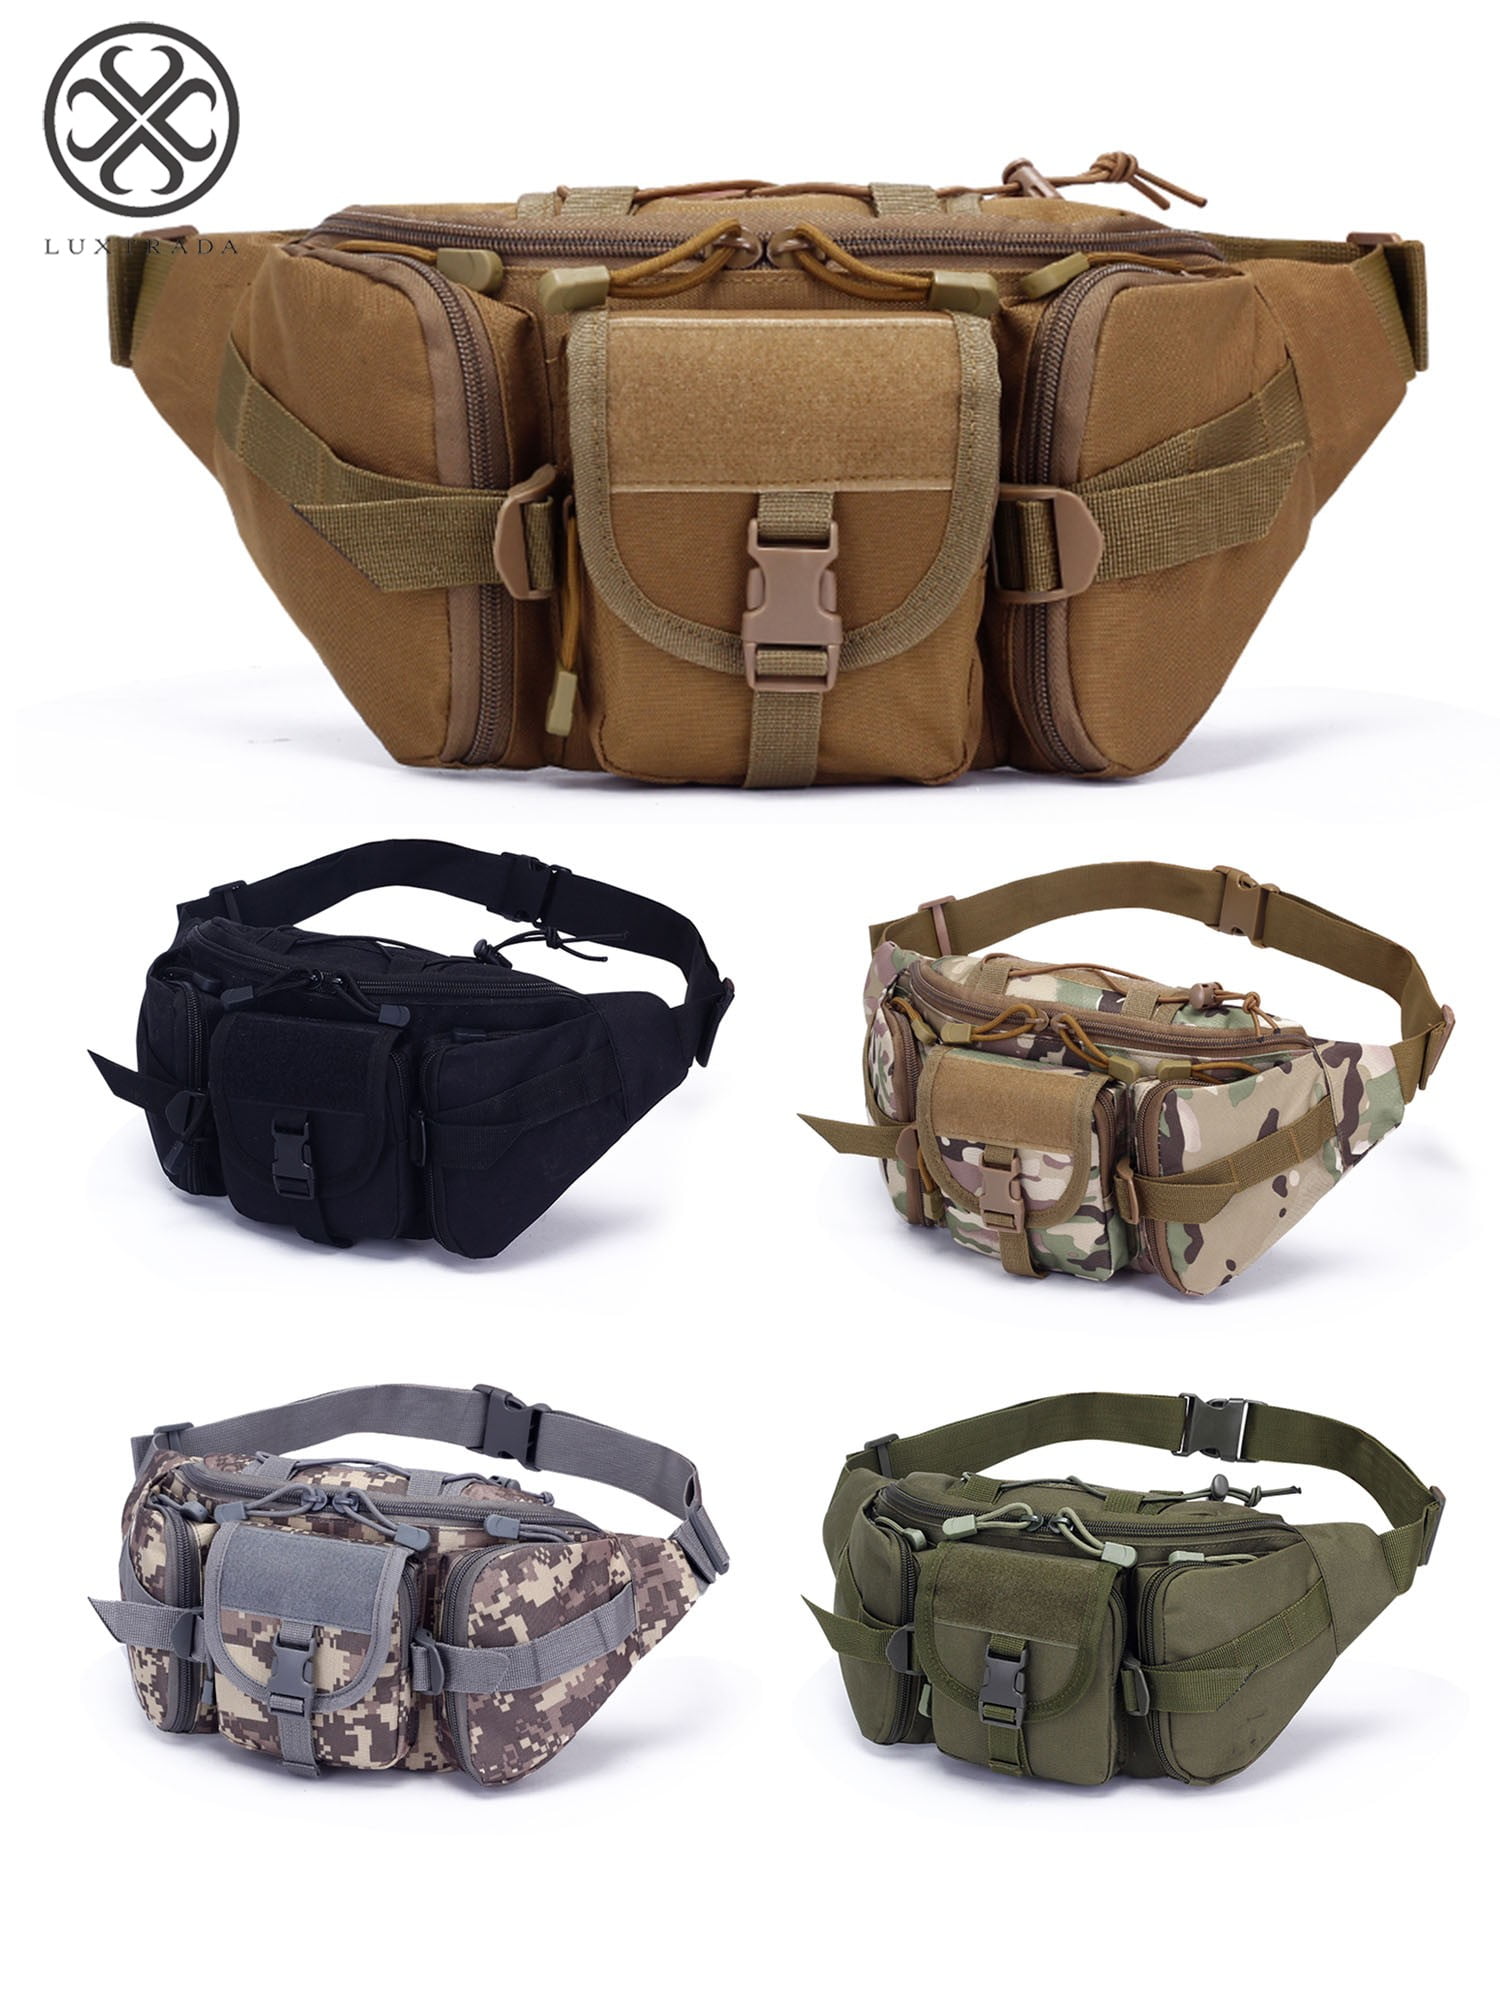 Tactical Molle Waist Pack Pouch Nylon Utility Outdoor Camping Hiking Belt Bag